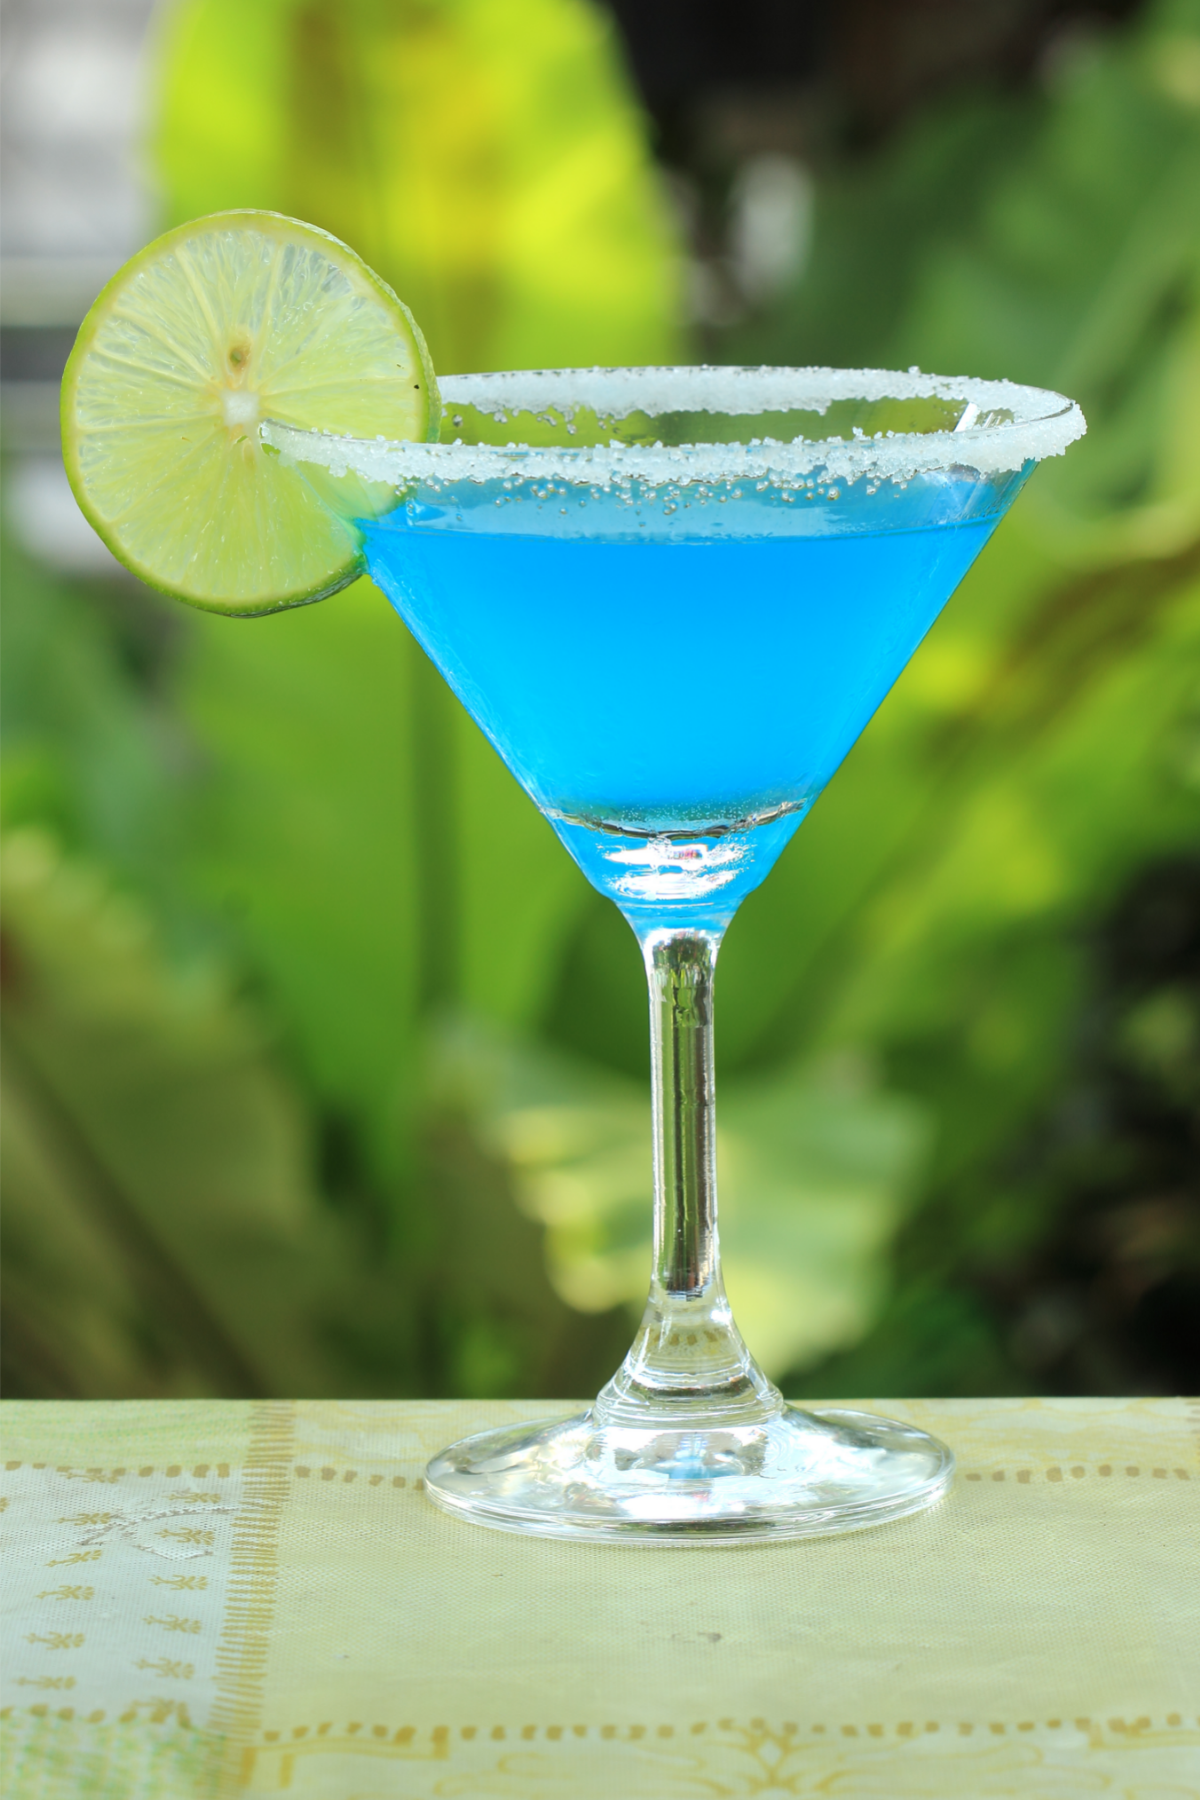 Get Rid Of Your “Blues” With Tribe’s CBD Blue Margarita 